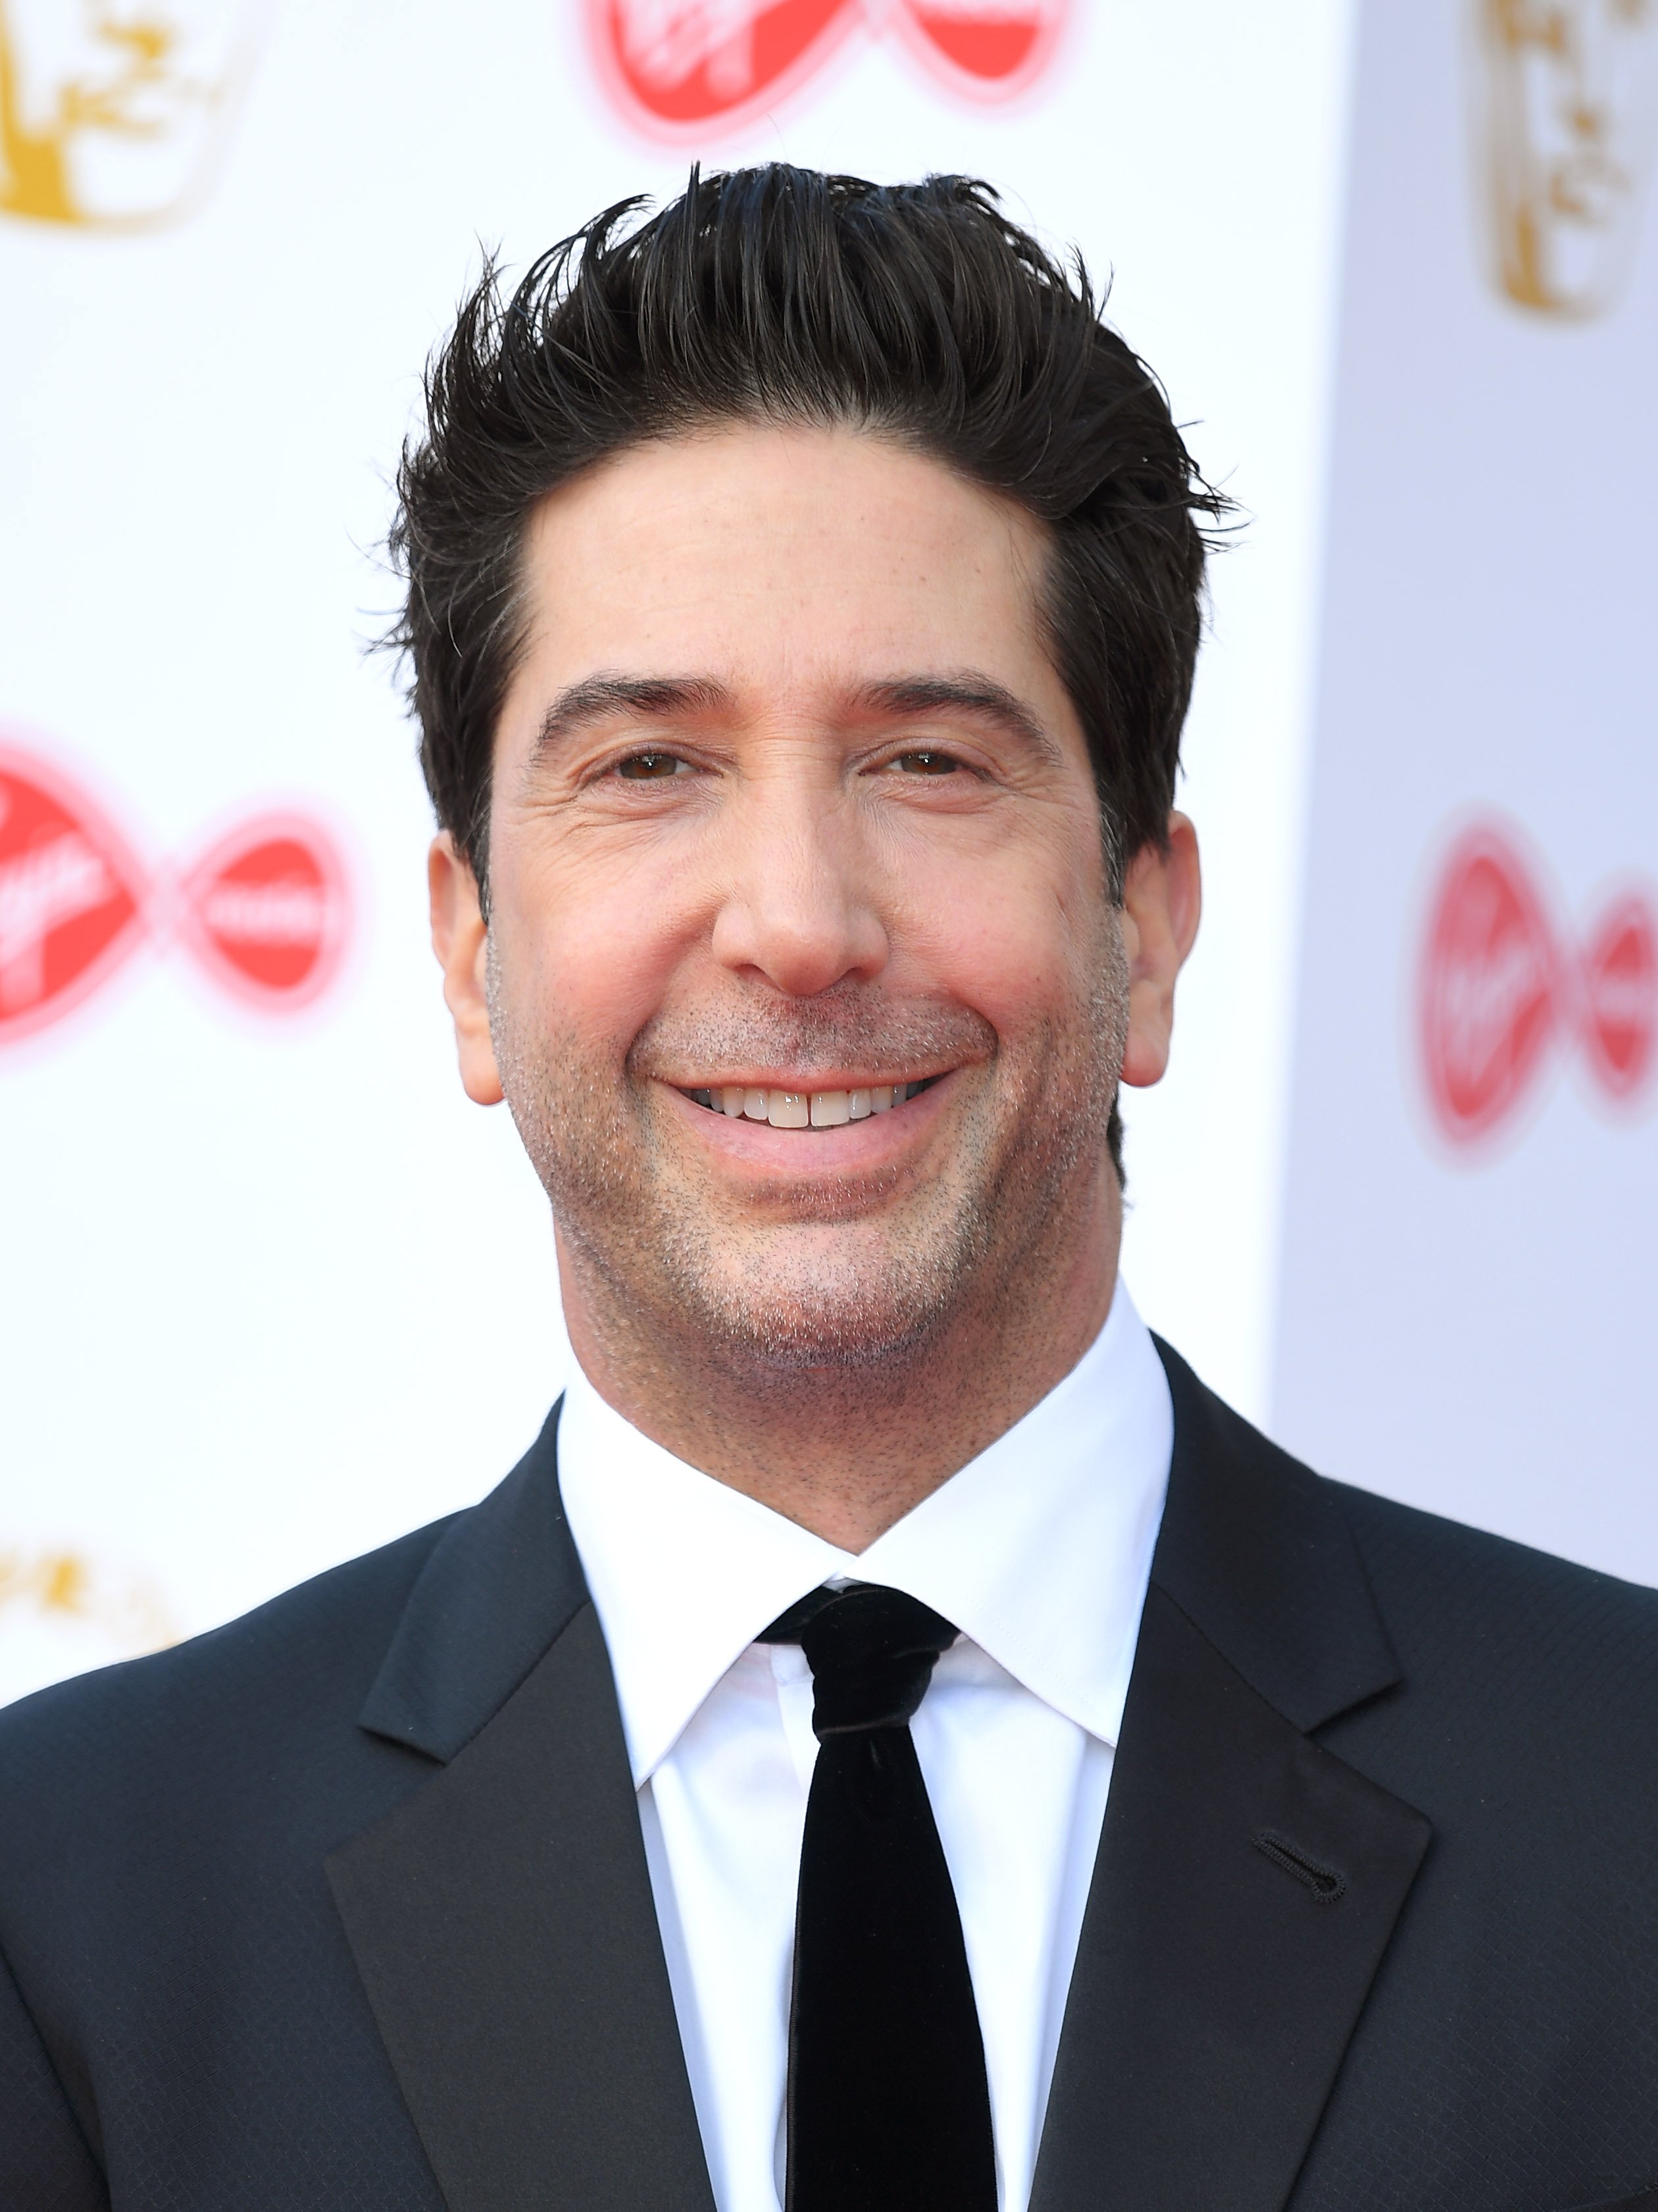 David Schwimmer poses in the Press Room at the Virgin TV BAFTA Television Award at The Royal Festival Hall on May 12, 2019 |Photo: Getty Images